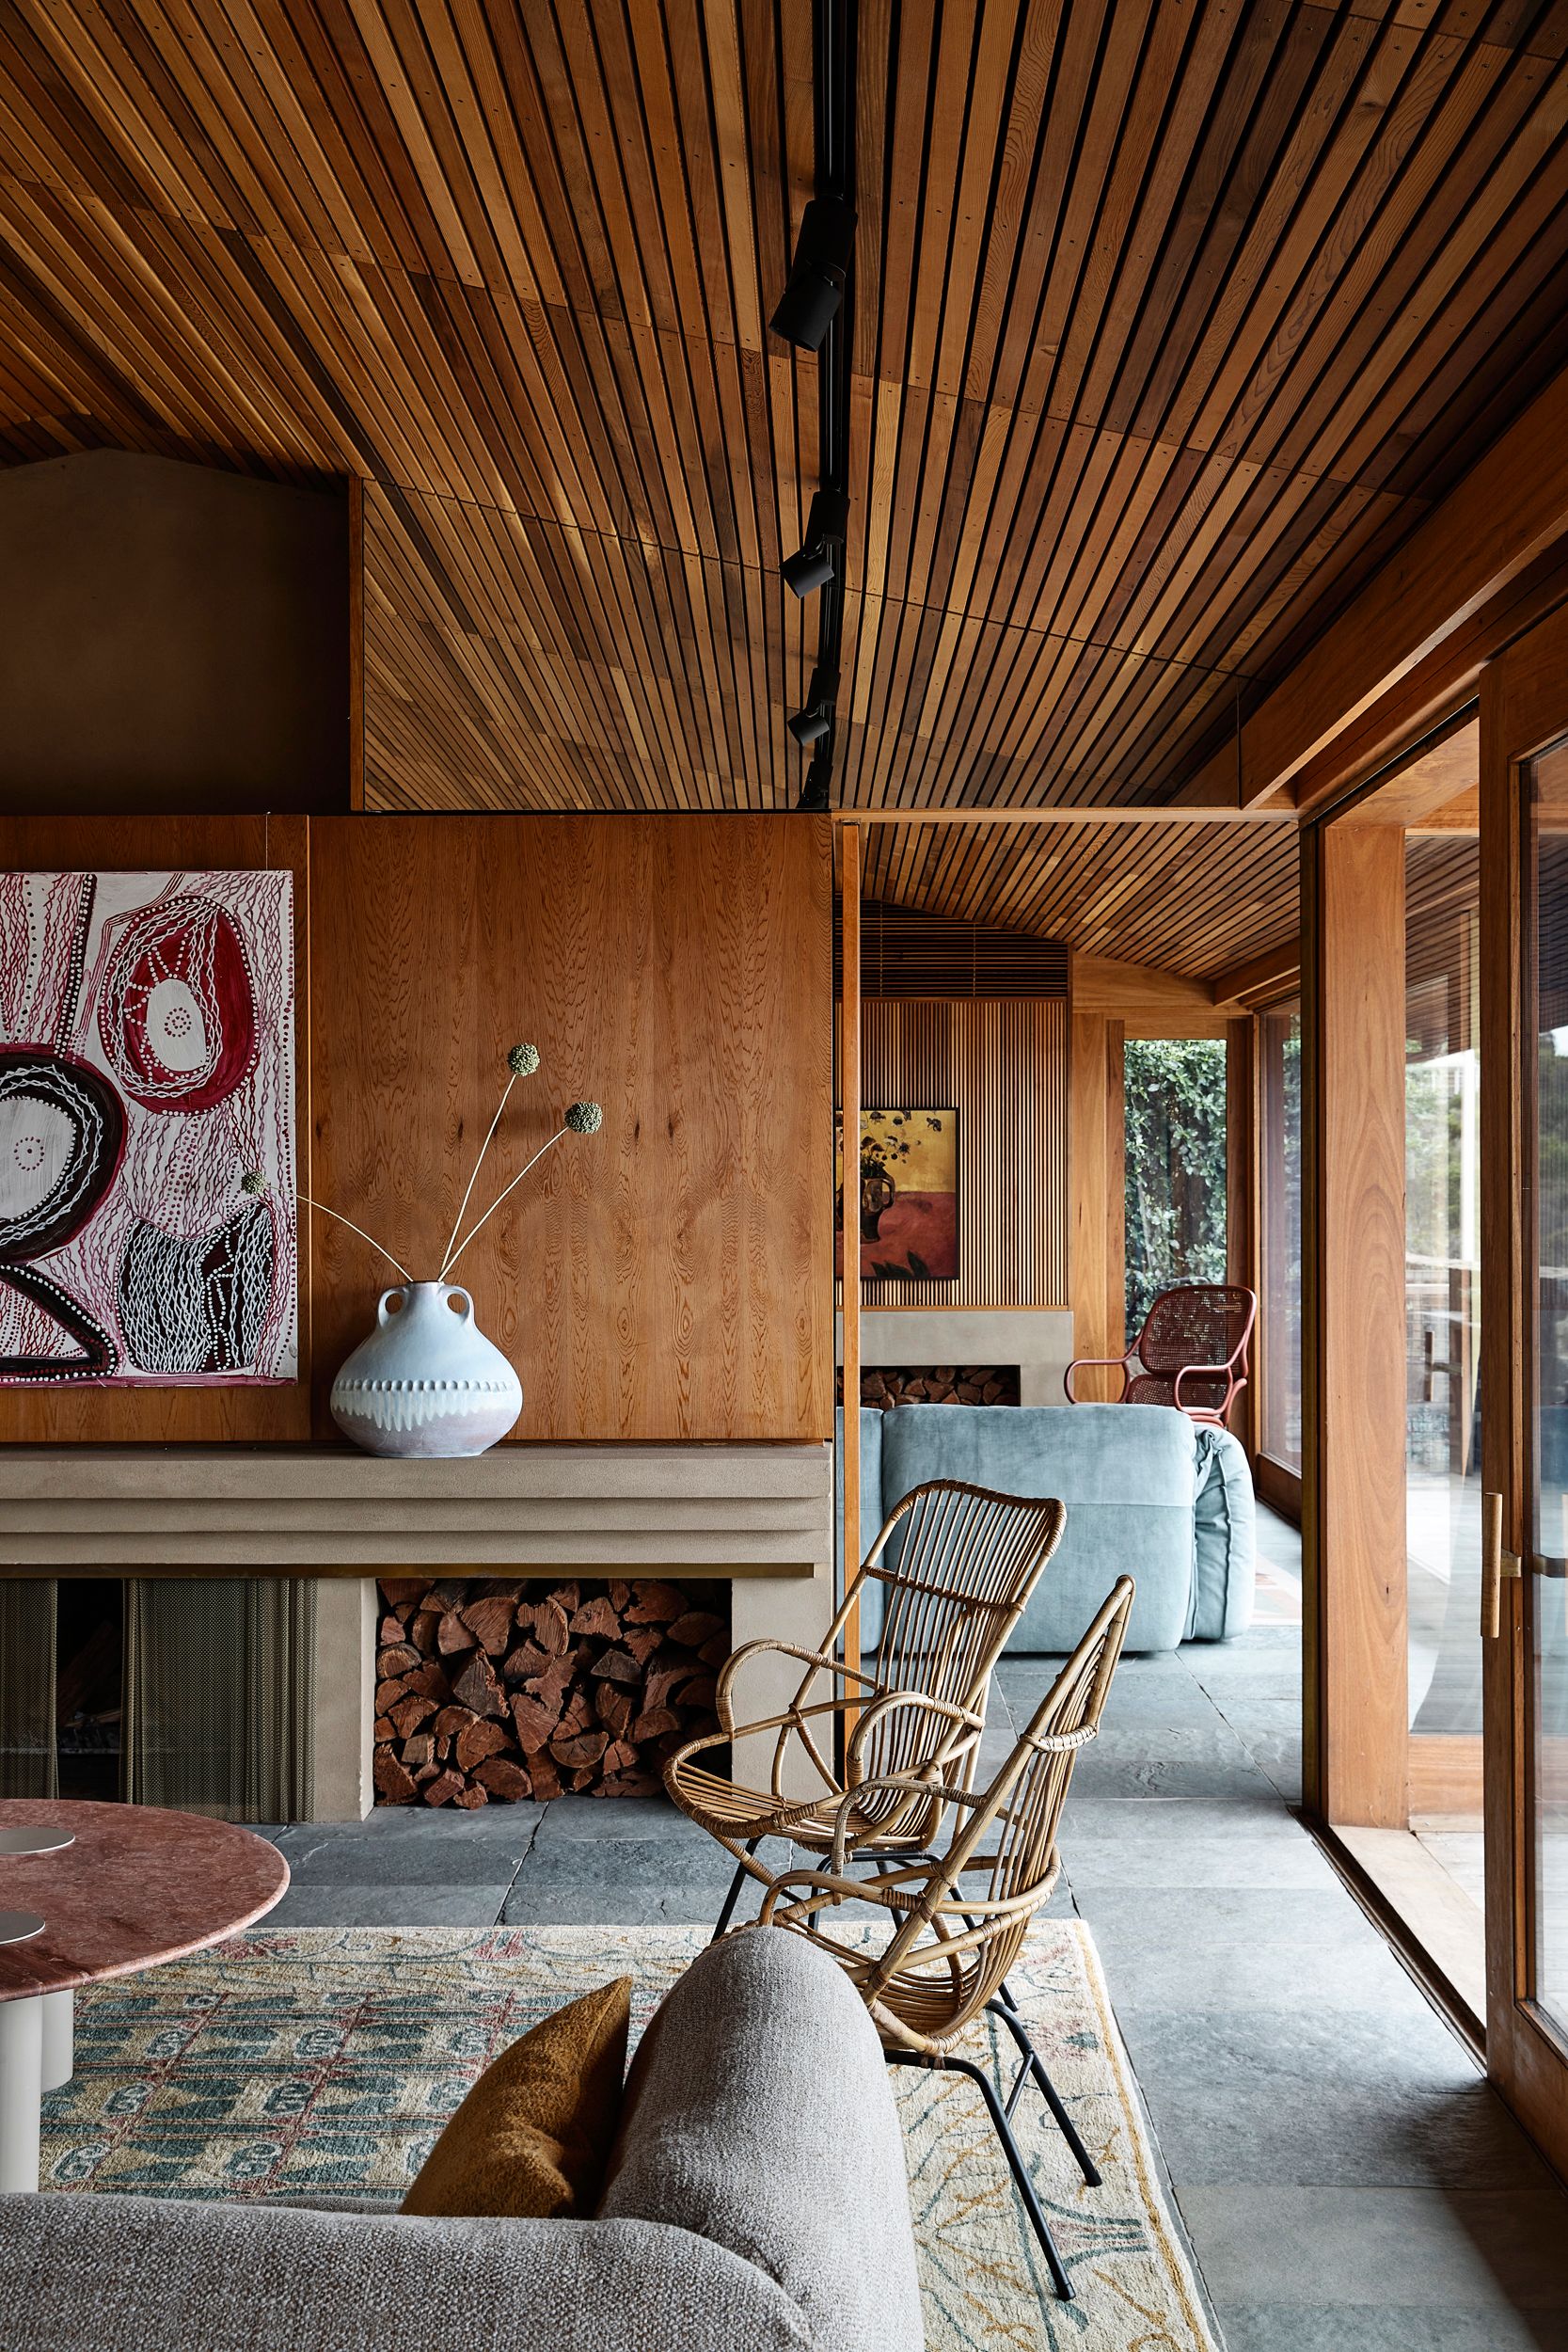 Always by Kennedy Nolan showing styled interior with large fireplace and timber ceiling